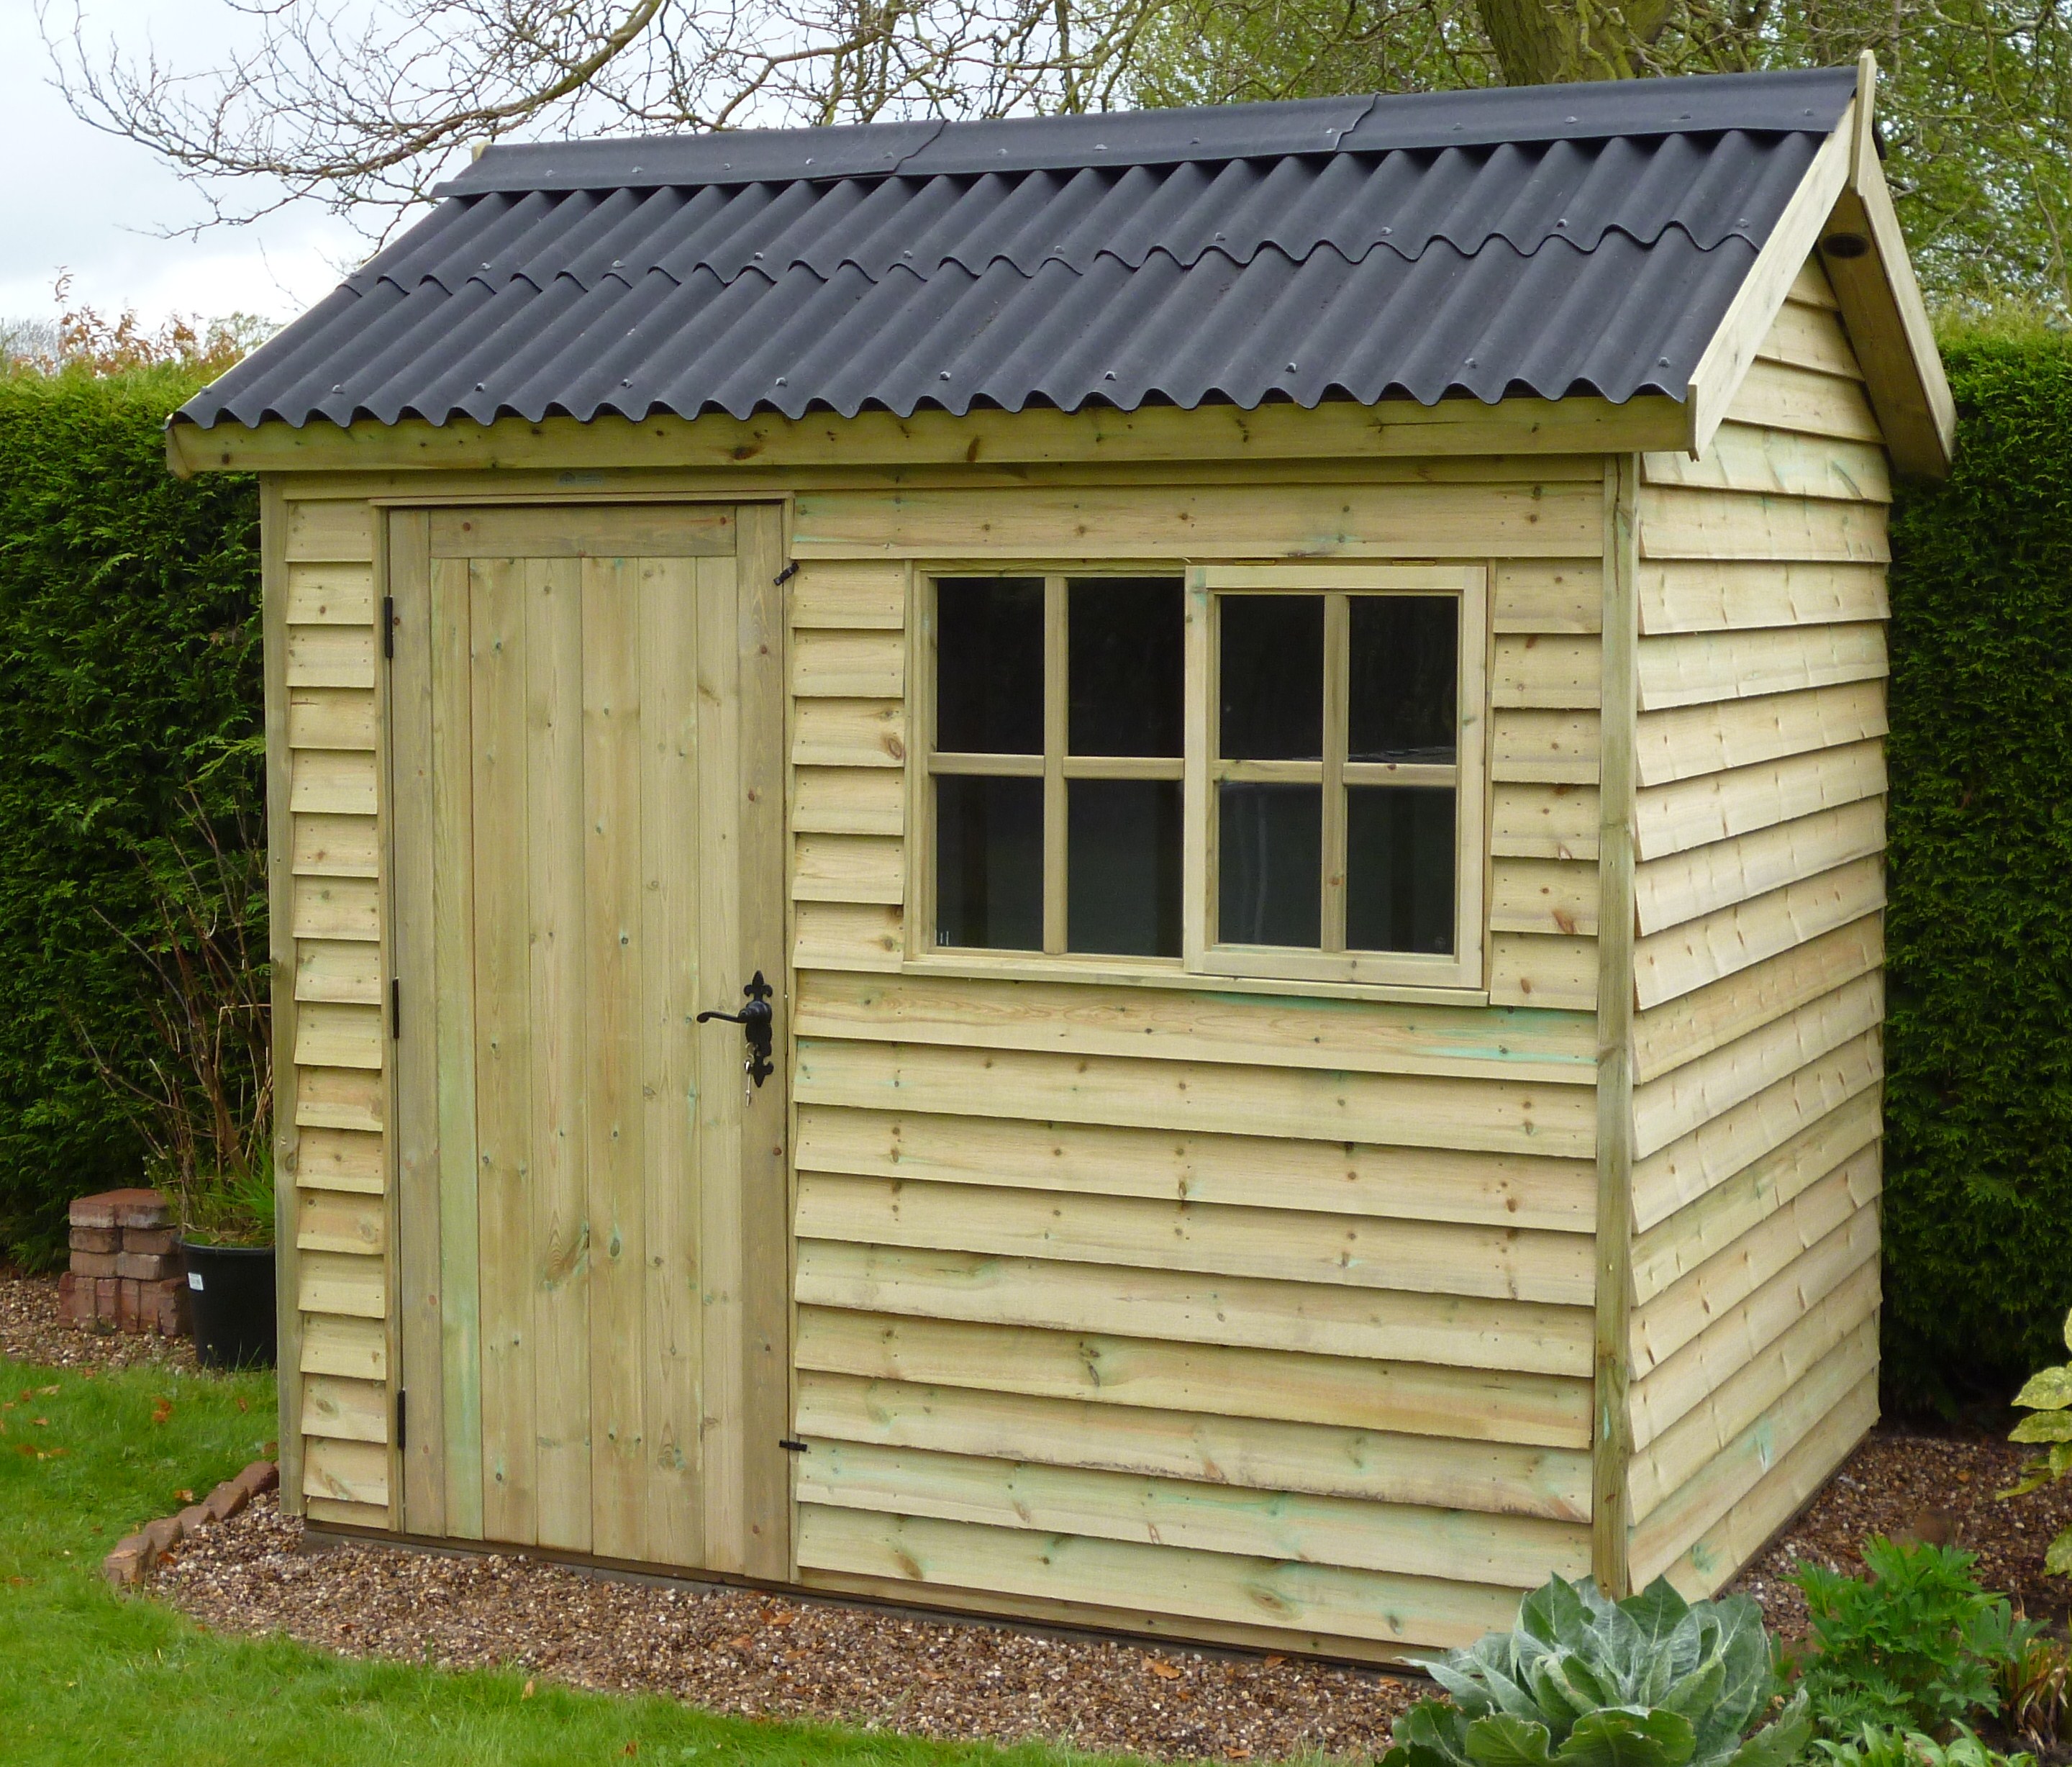 small studio house design with double pitched roof - digsdigs